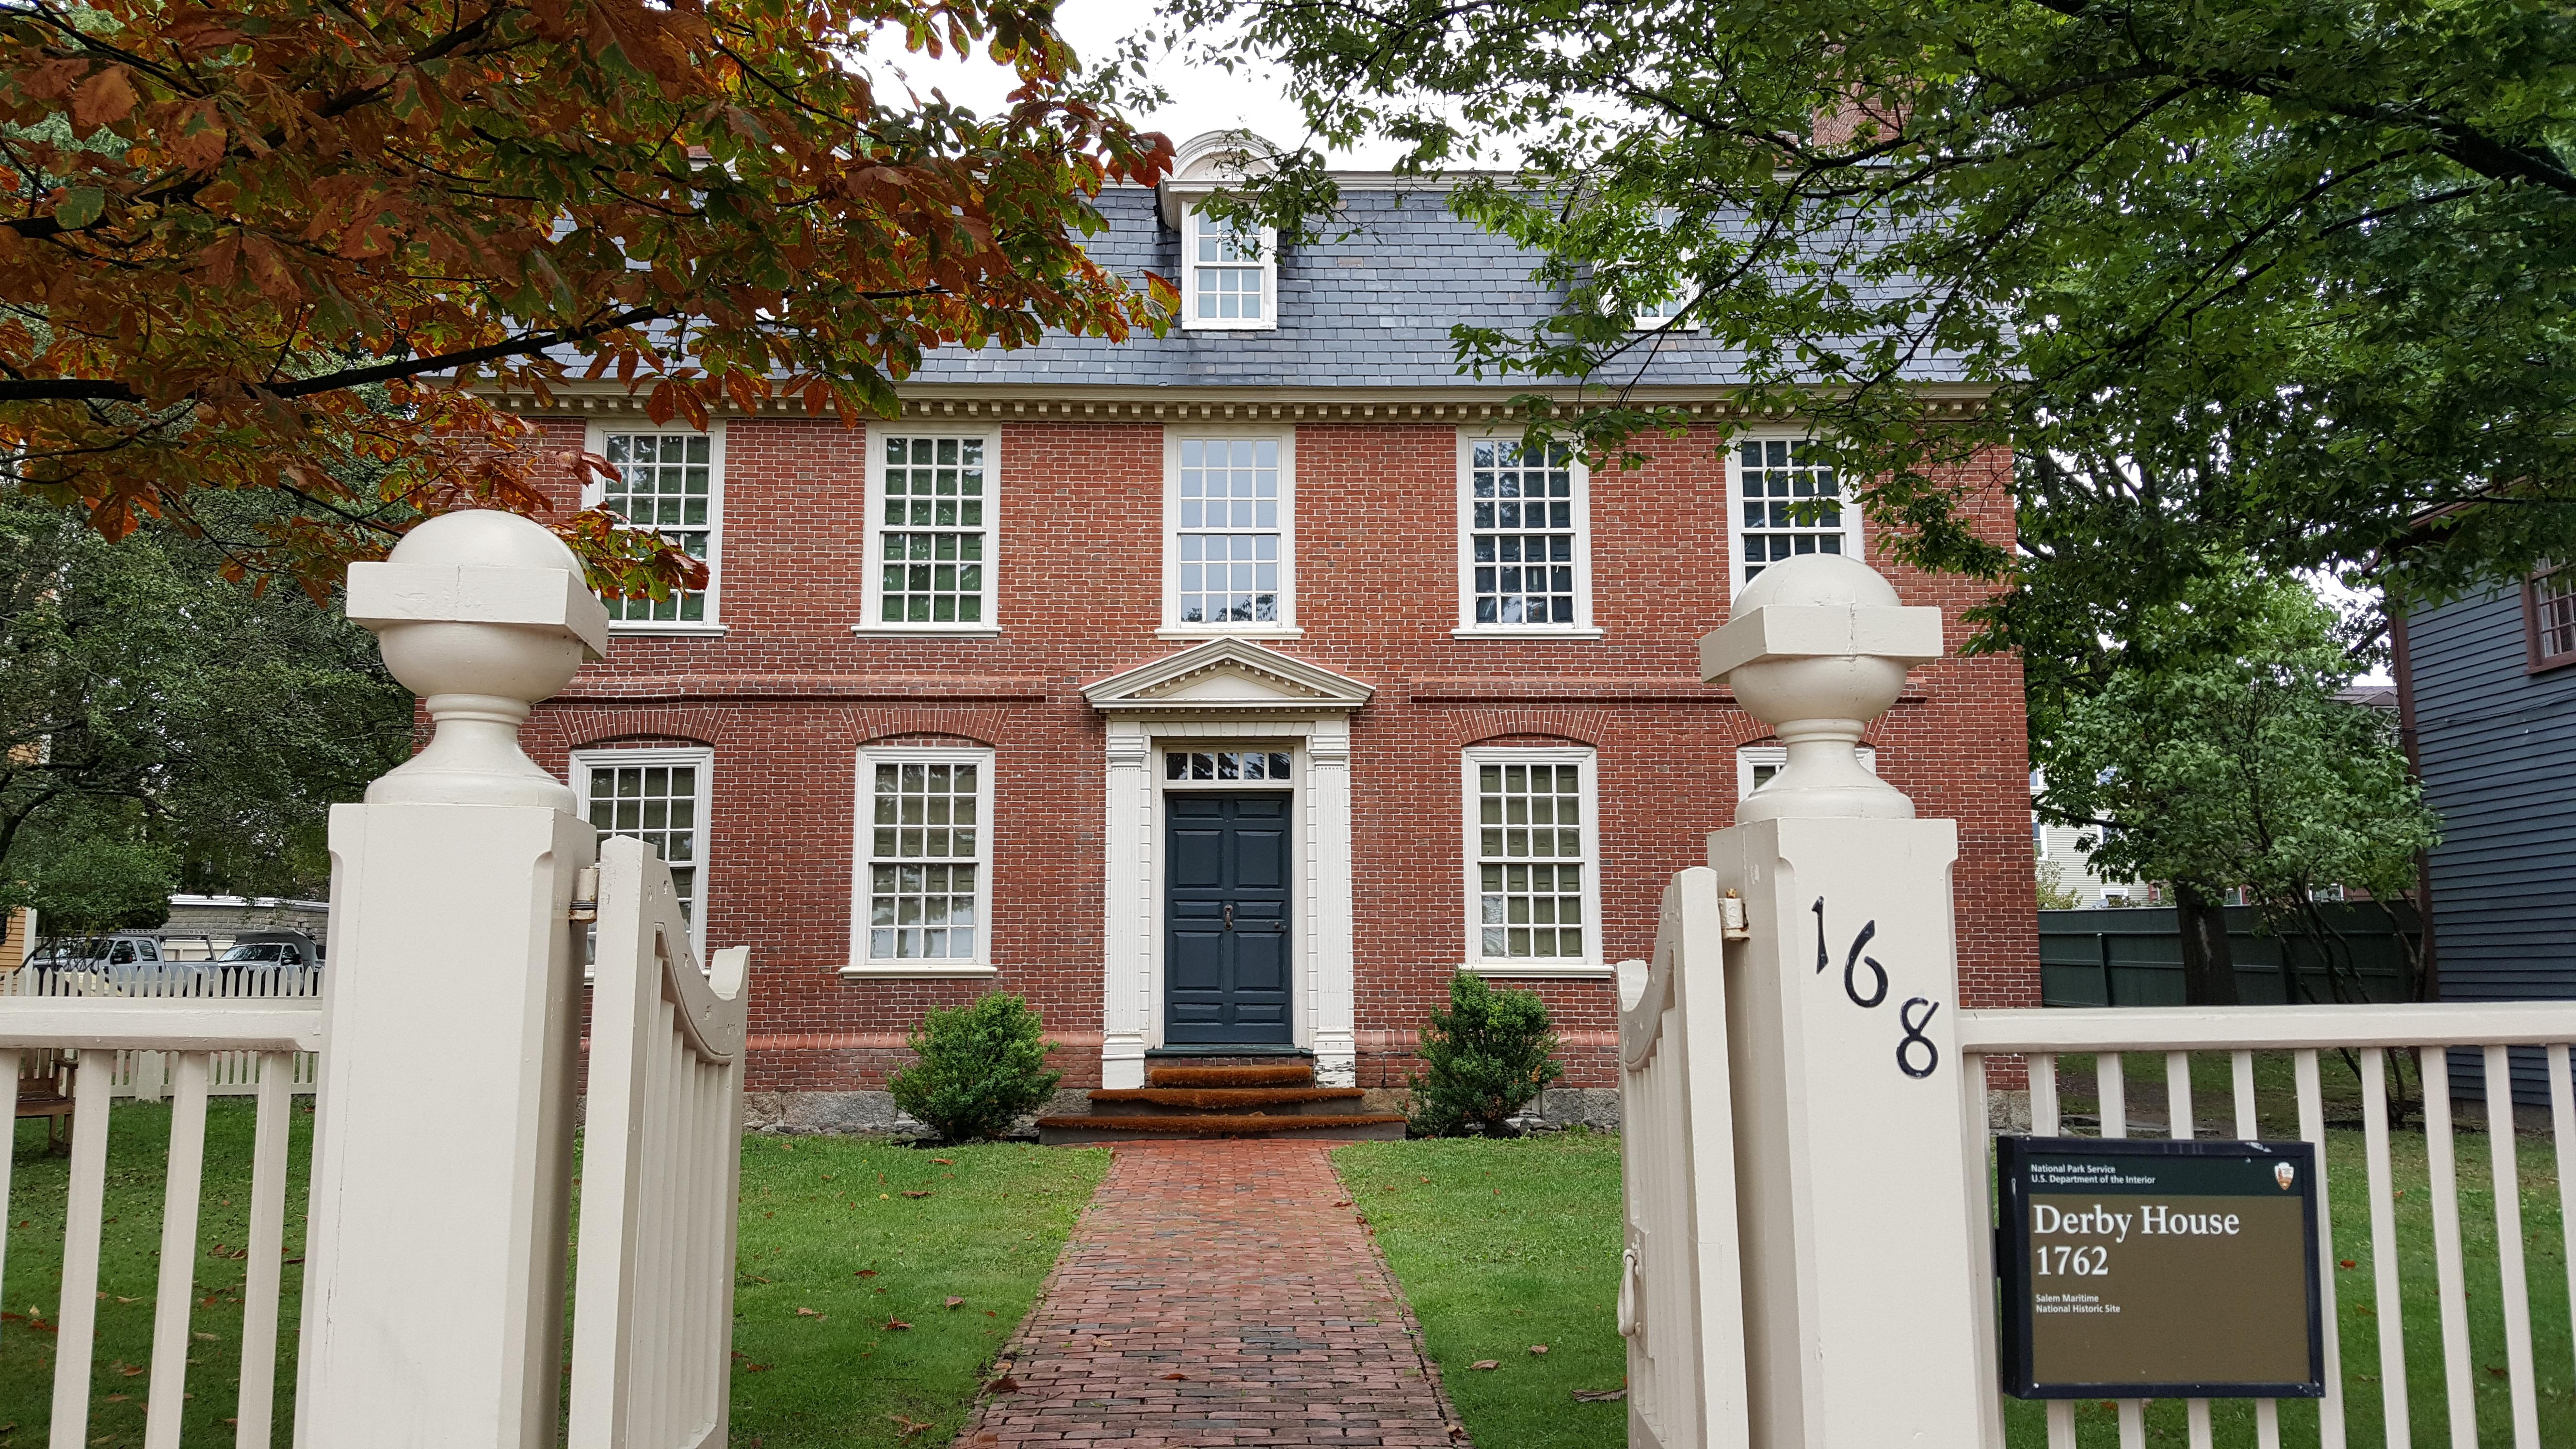 Three story red brick building with white windows and a brick pathway through grasses and trees.